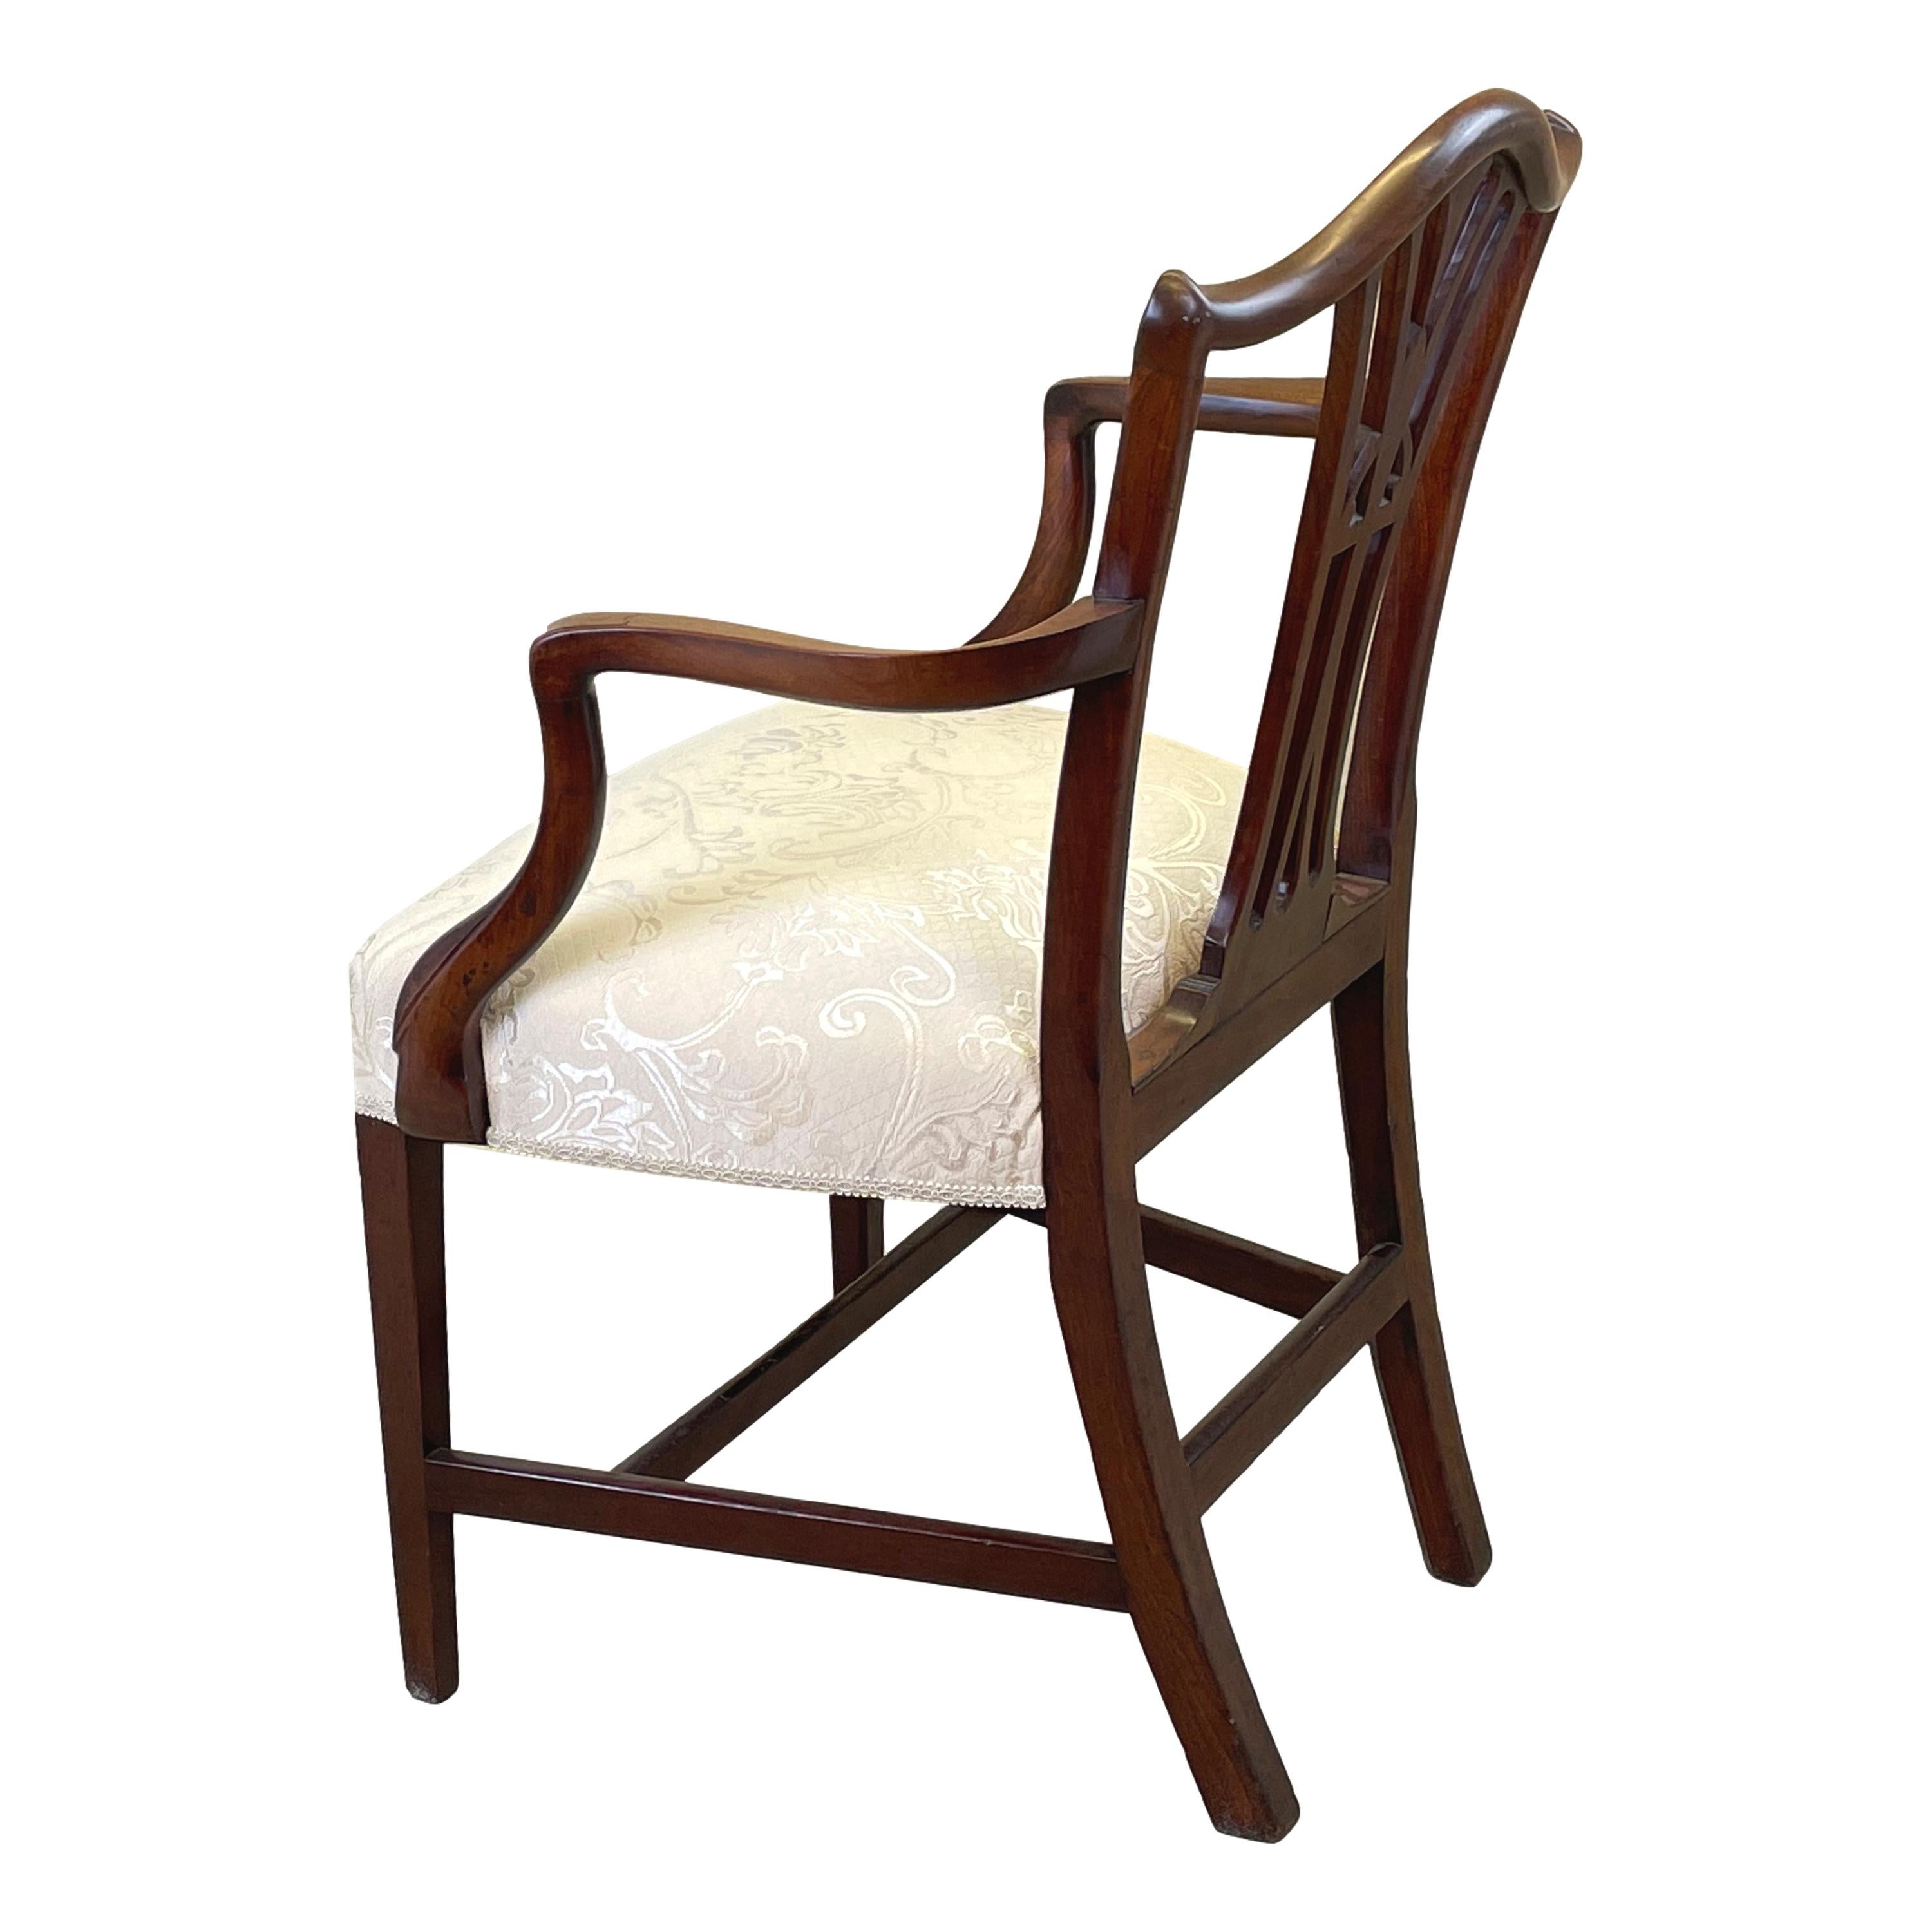 A superb quality and rarely found 18th century Hepplewhite
Period mahogany masters armchair of imposing proportions
Having carved decoration to pierced splat back over
Upholstered seat raised on elegant square tapered
Legs and